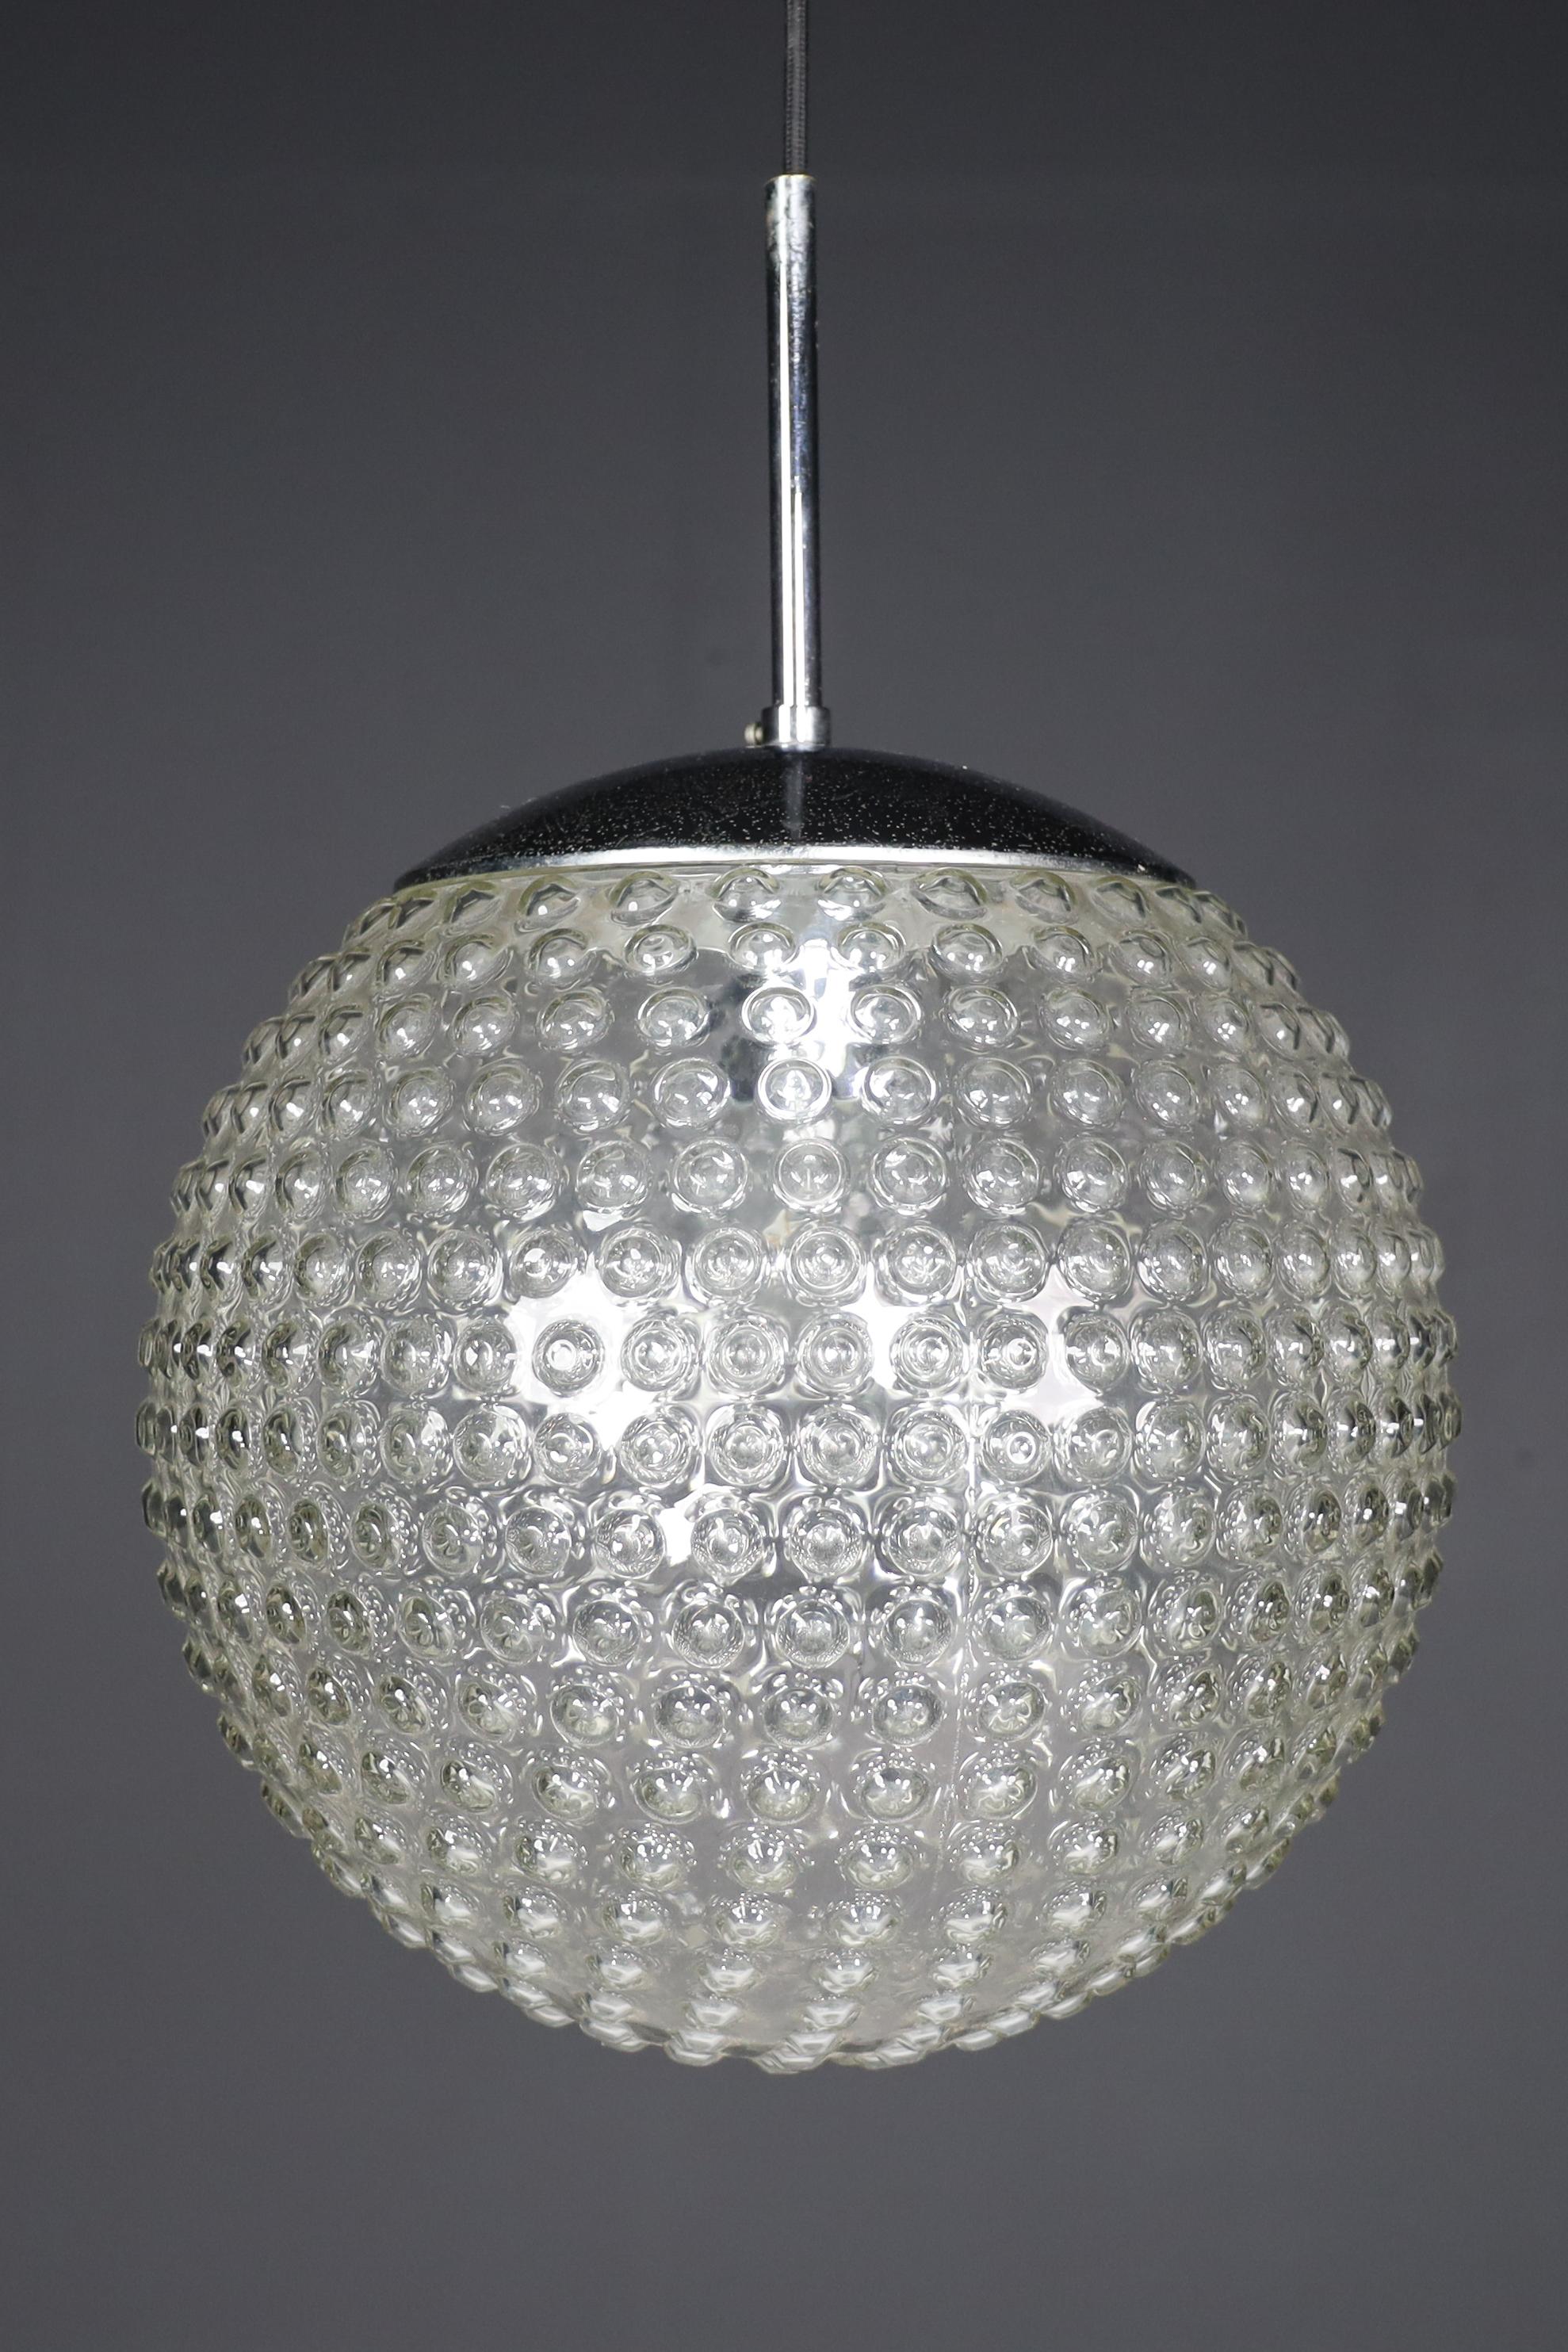 Rolf Krüger Bubble Glass Pendant for Staff, Germany 1970s

Rolf Krüger for Staff designed these beautiful bubble glass pendants in Germany during the 1970s. They come with chromed hardware and black cord wire, and the glass boasts a subtle bubble